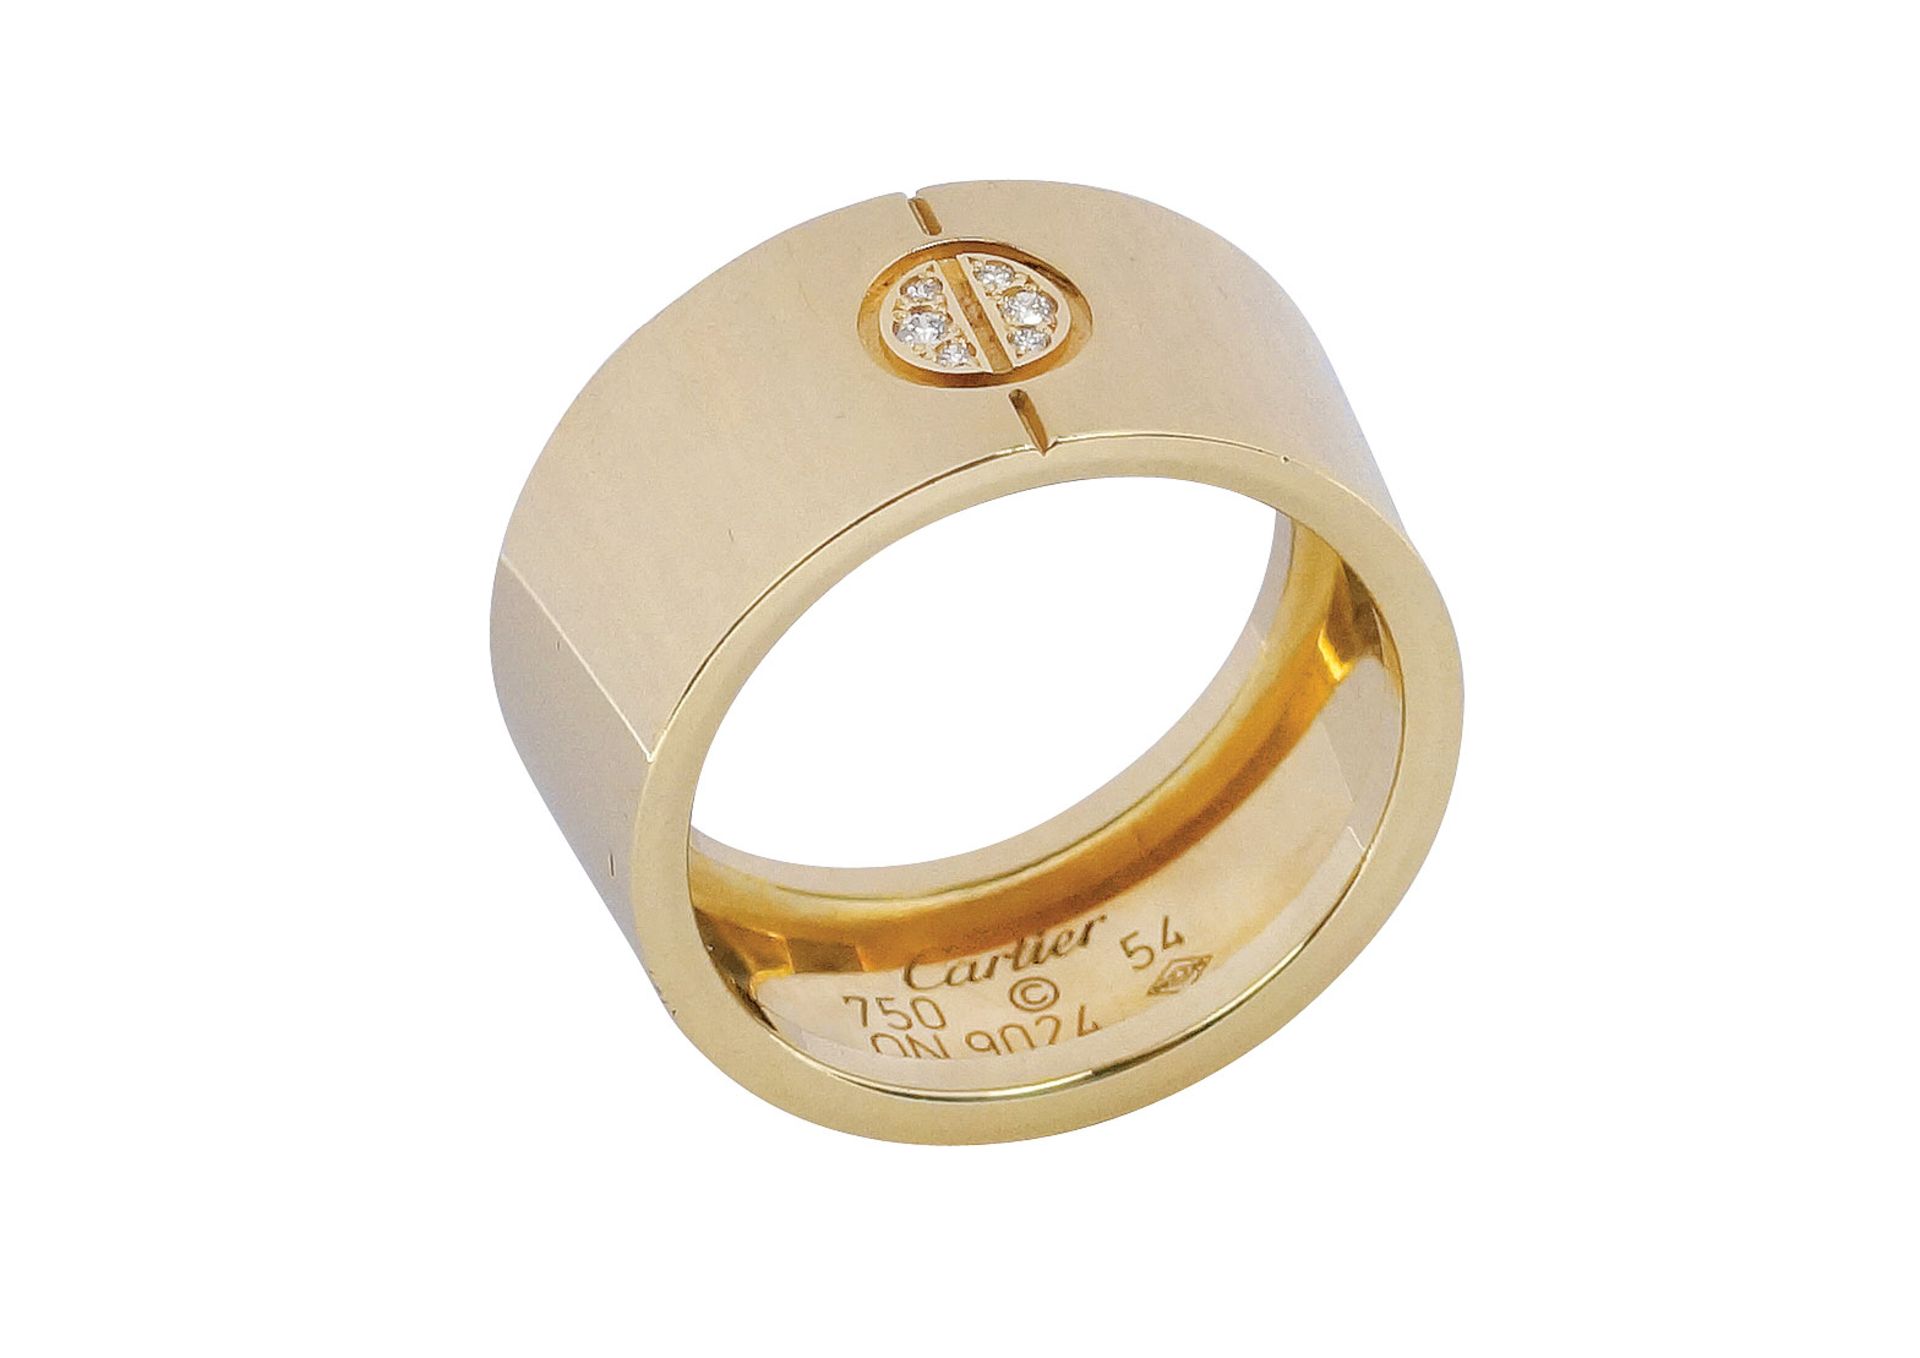 A Cartier 18k gold and diamond ring